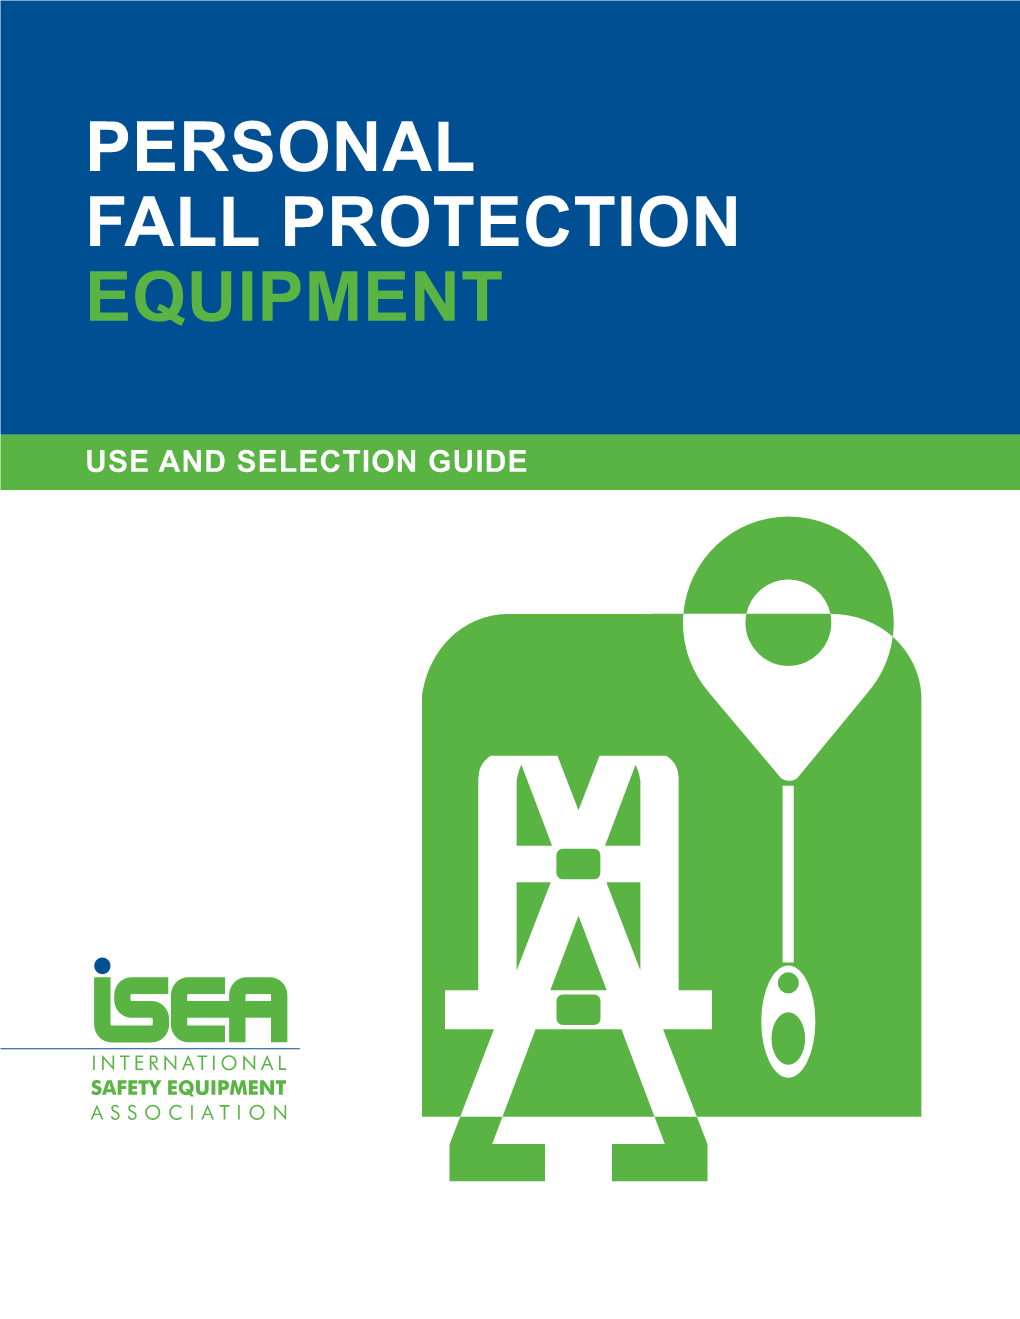 Personal Fall Protection Equipment Use and Selection Guide